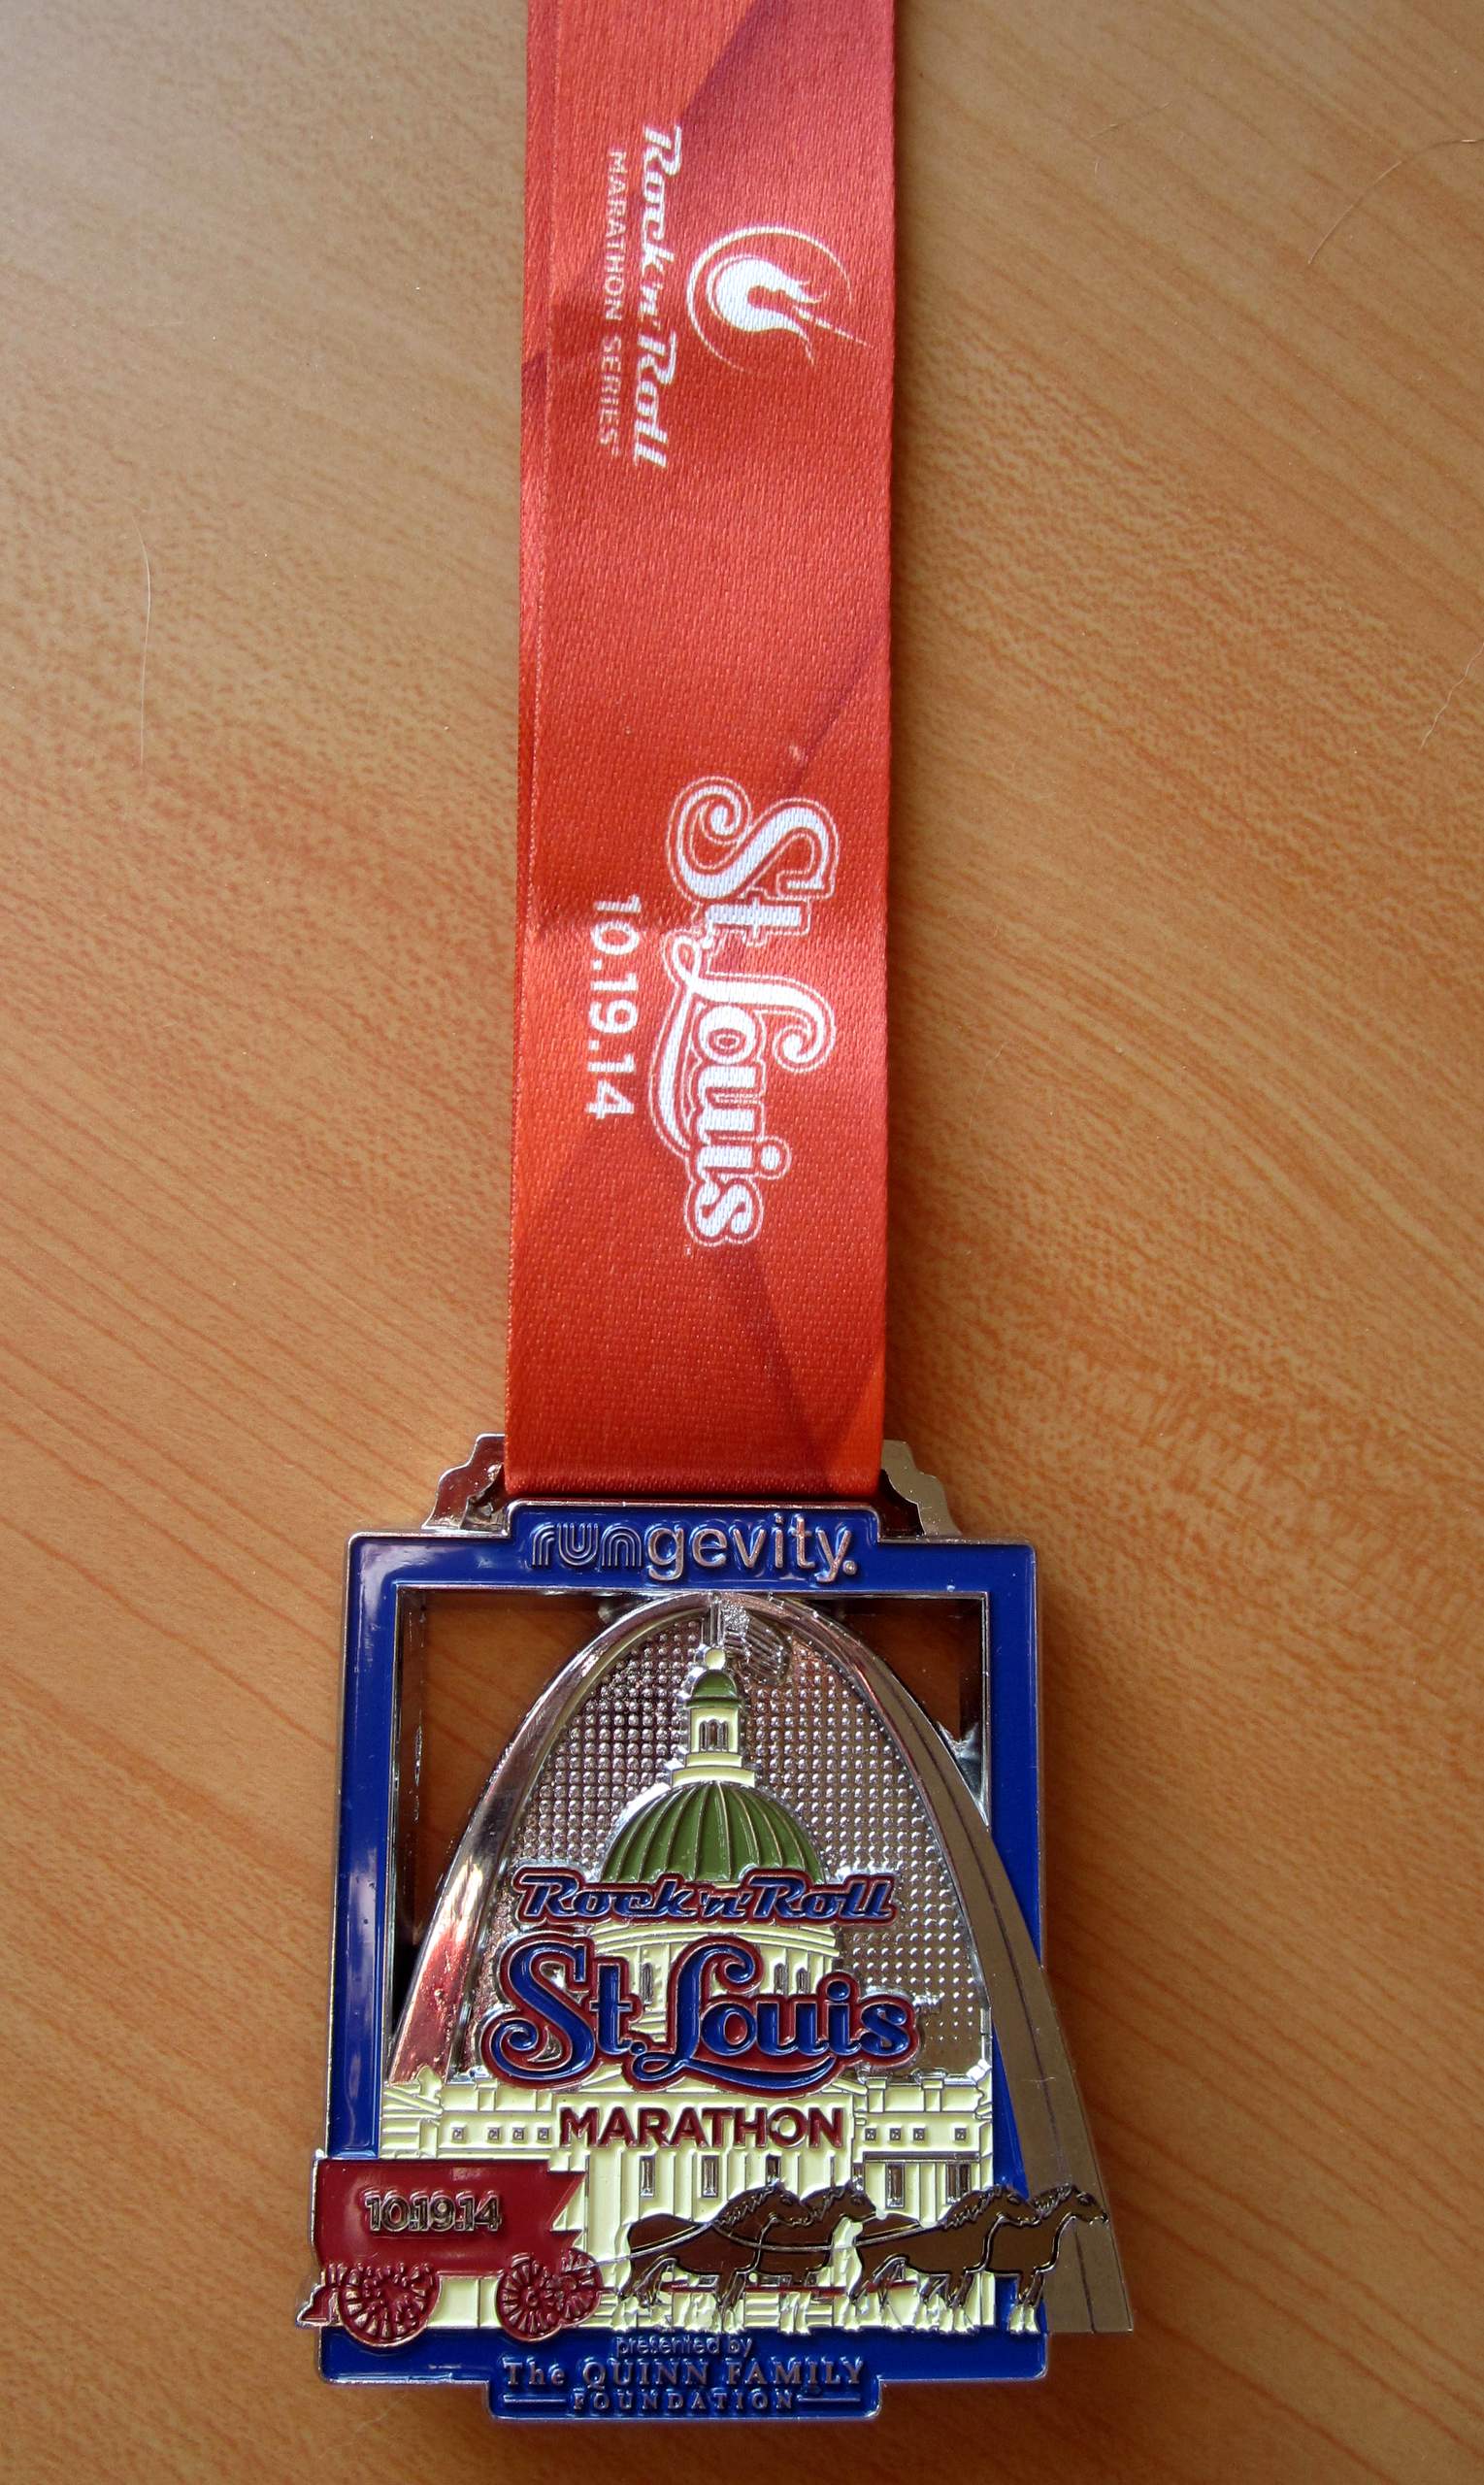 The medal awarded to finishers of the 2014 Rock 'n' Roll St. Louis Marathon.